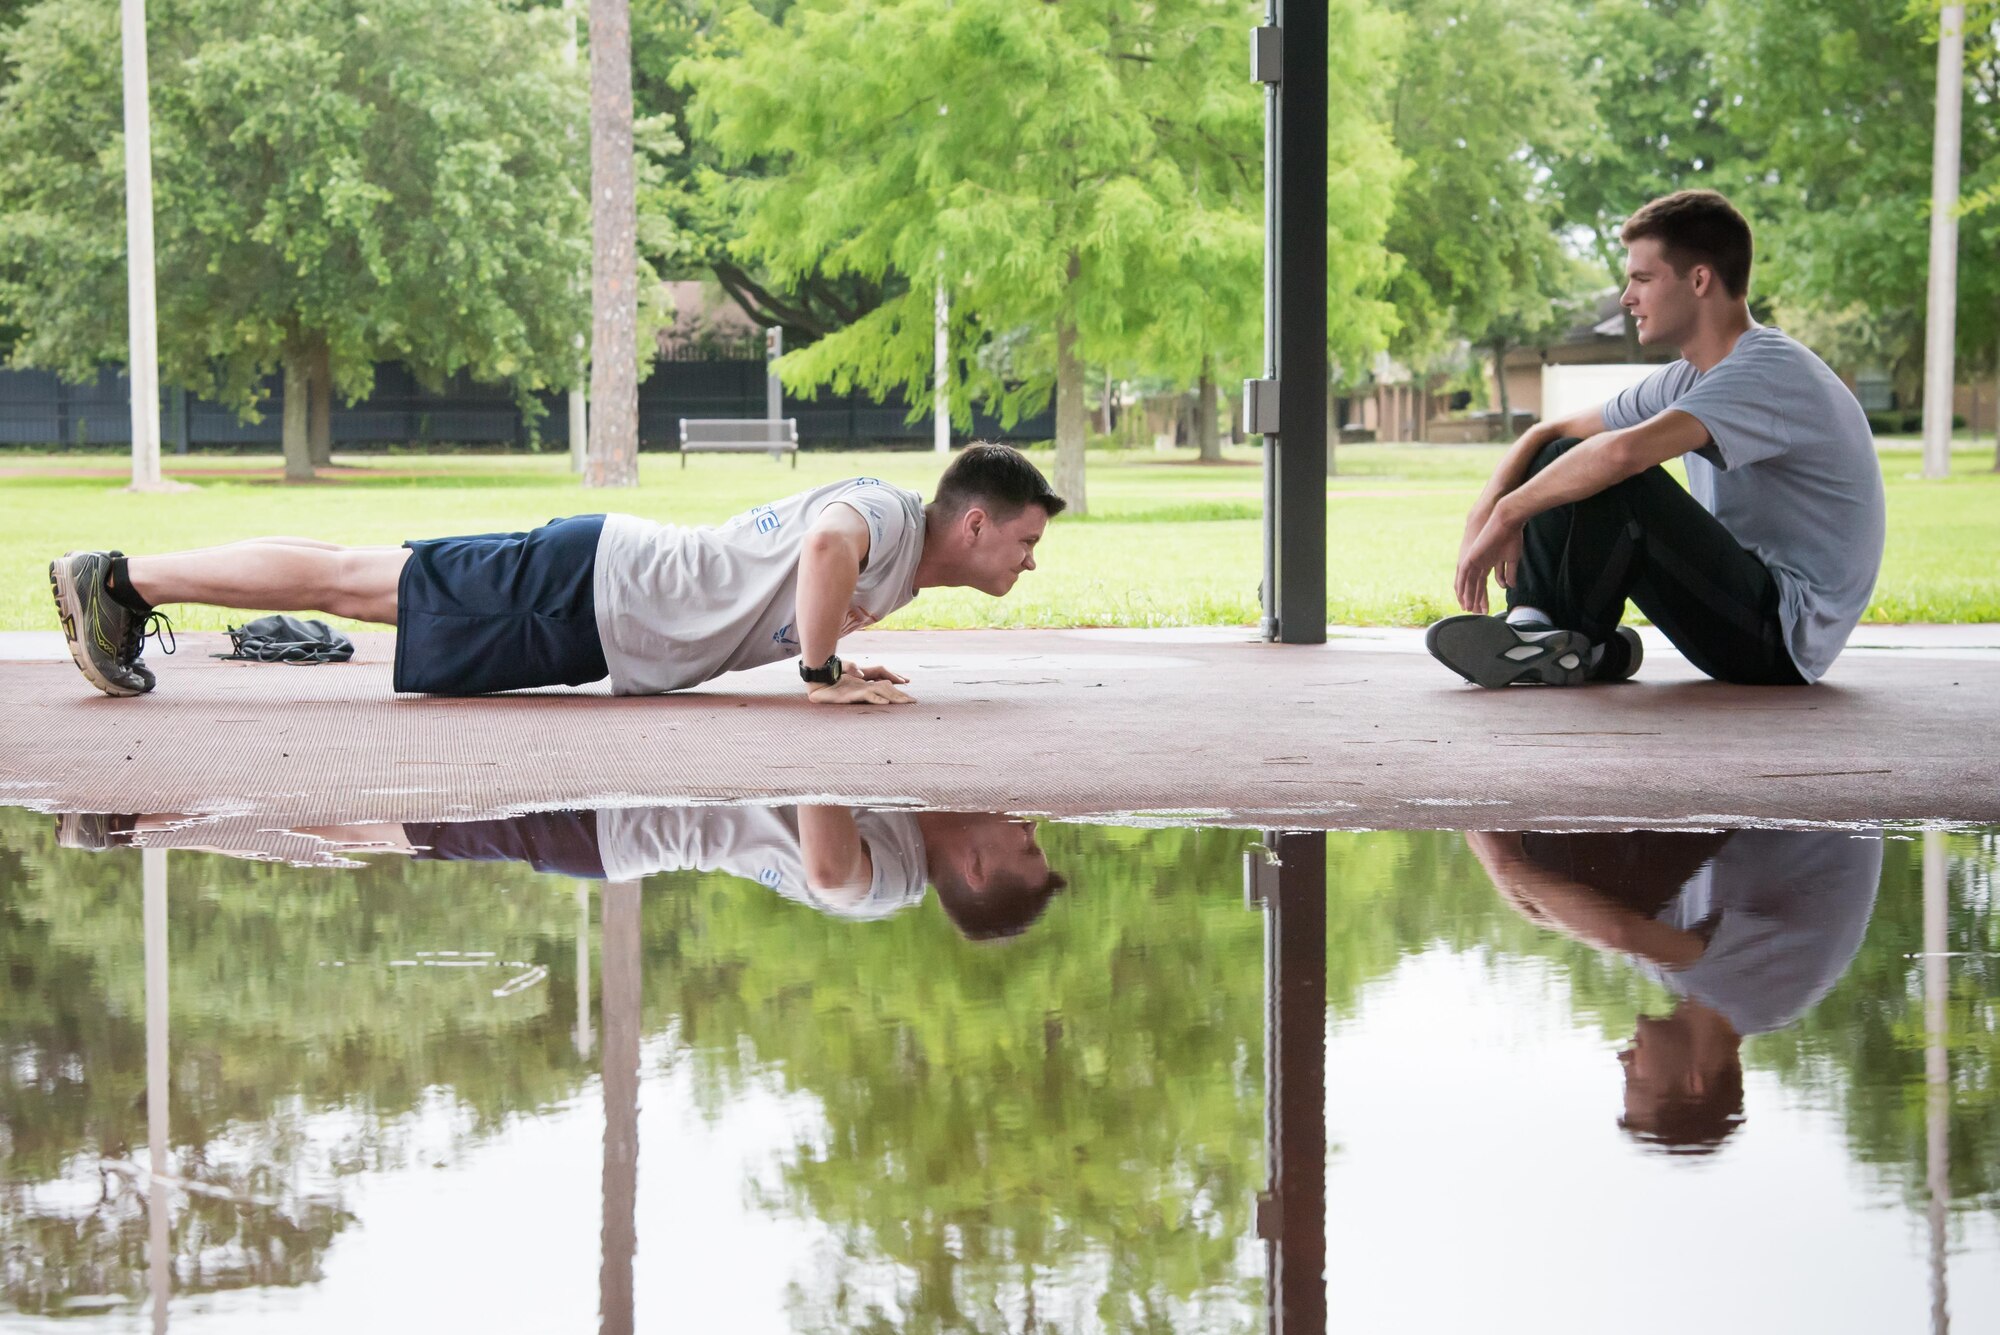 Chris Geter and Jonathan Green, 403rd Developmental and Training Flight trainees, take turns practicing pushups during a physical training session June 3, 2017 at Keesler Air Force Base, Mississippi.(U.S. Air Force photo/Staff Sgt. Heather Heiney)